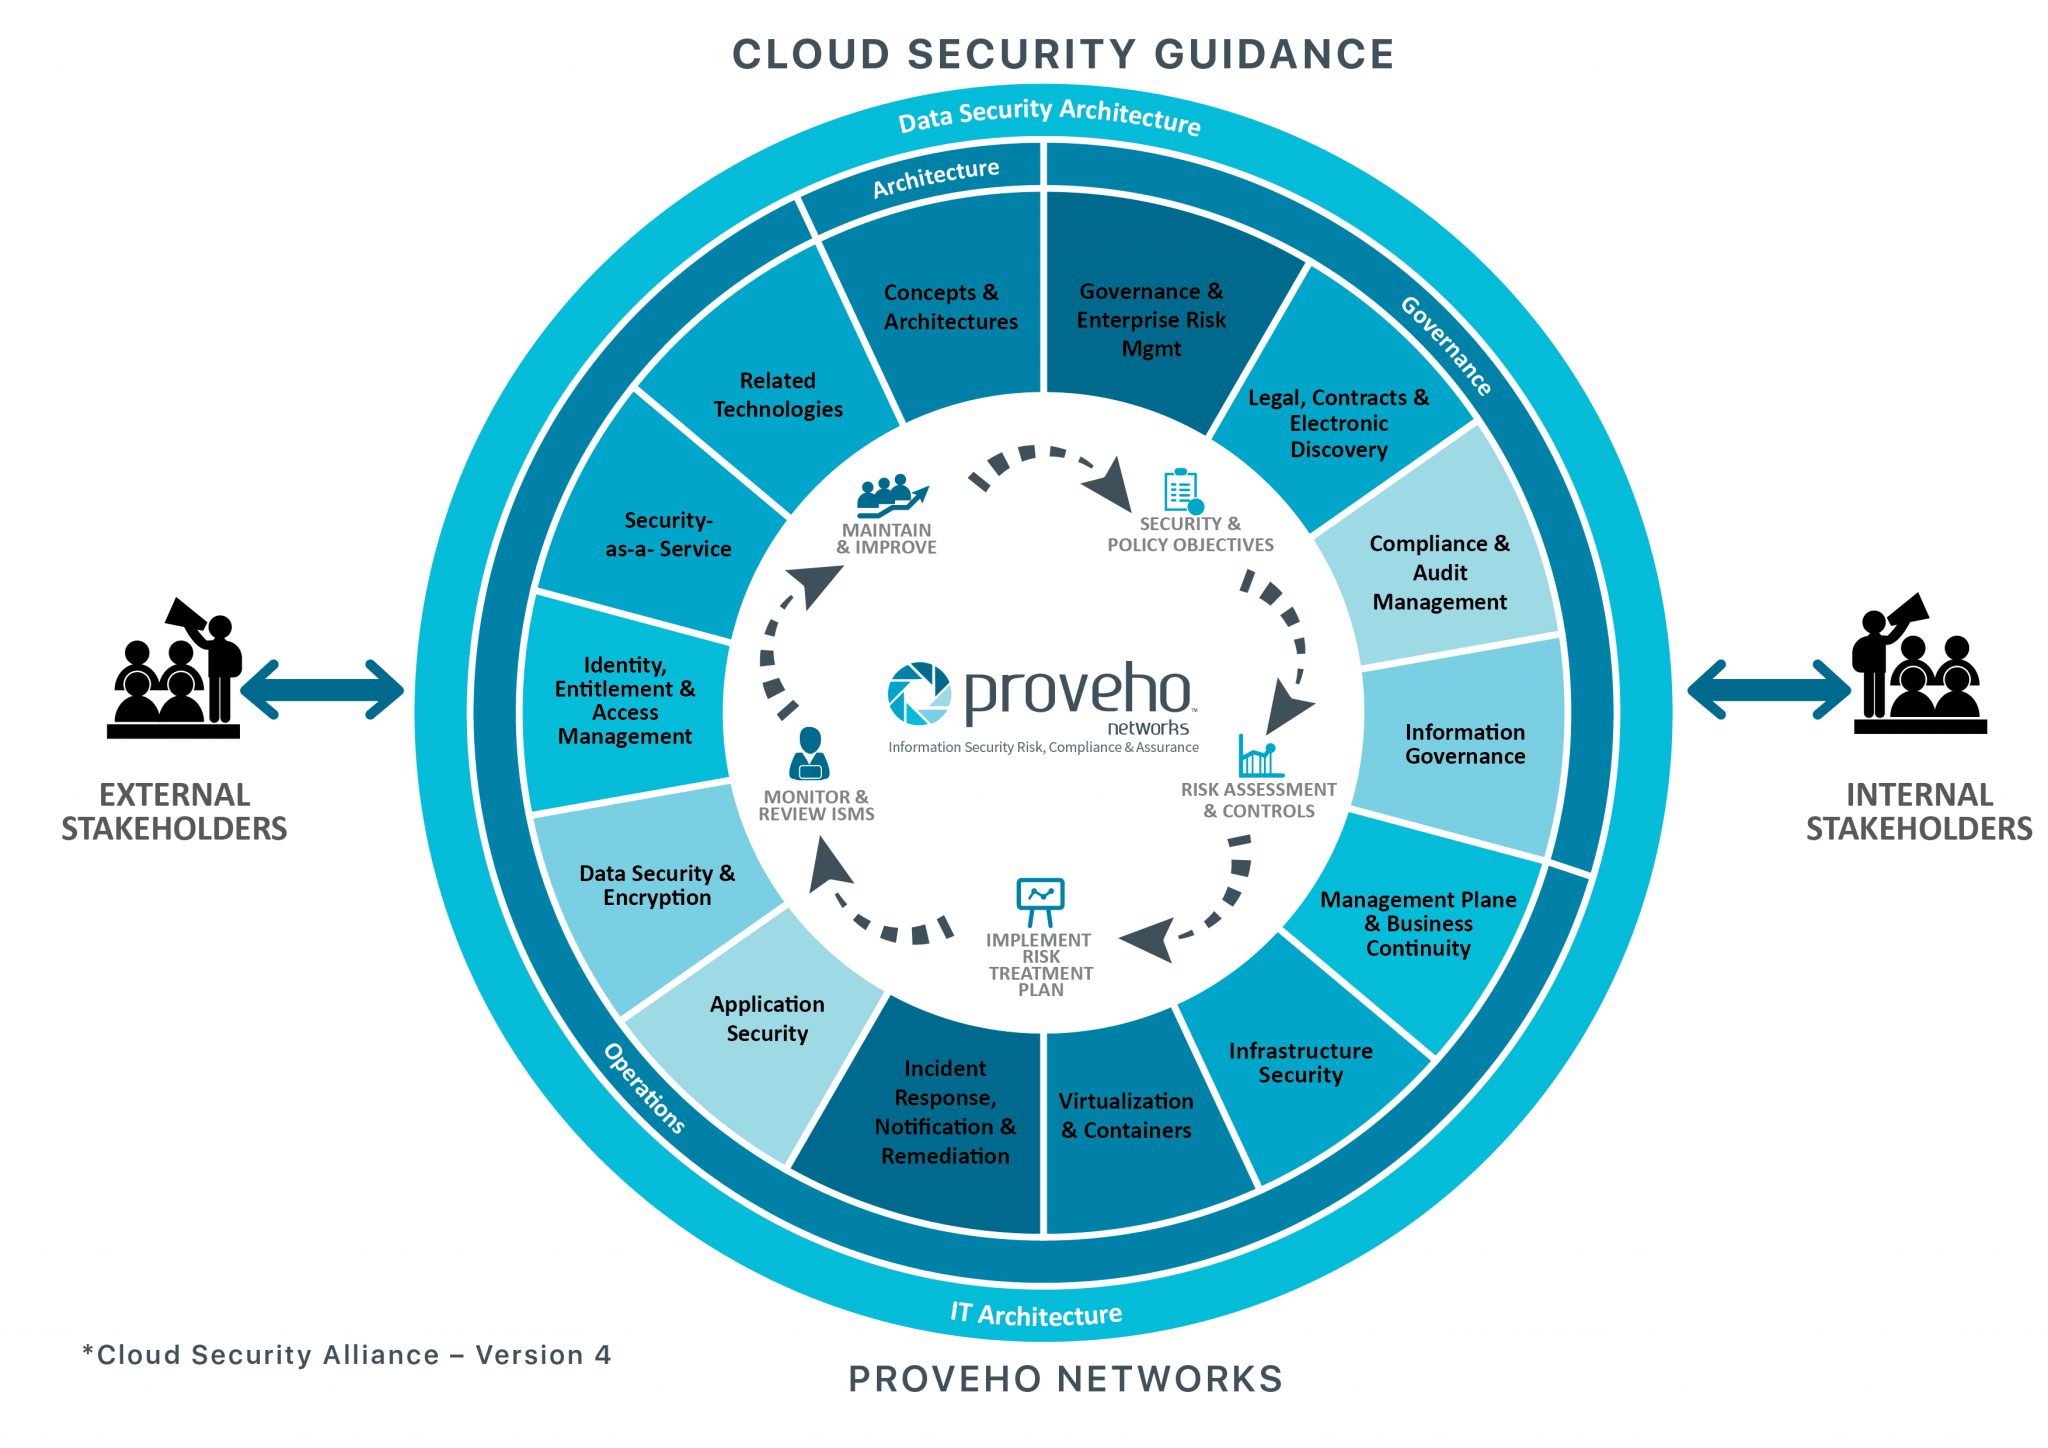 Cloud Security Guidance - Proveho Networks